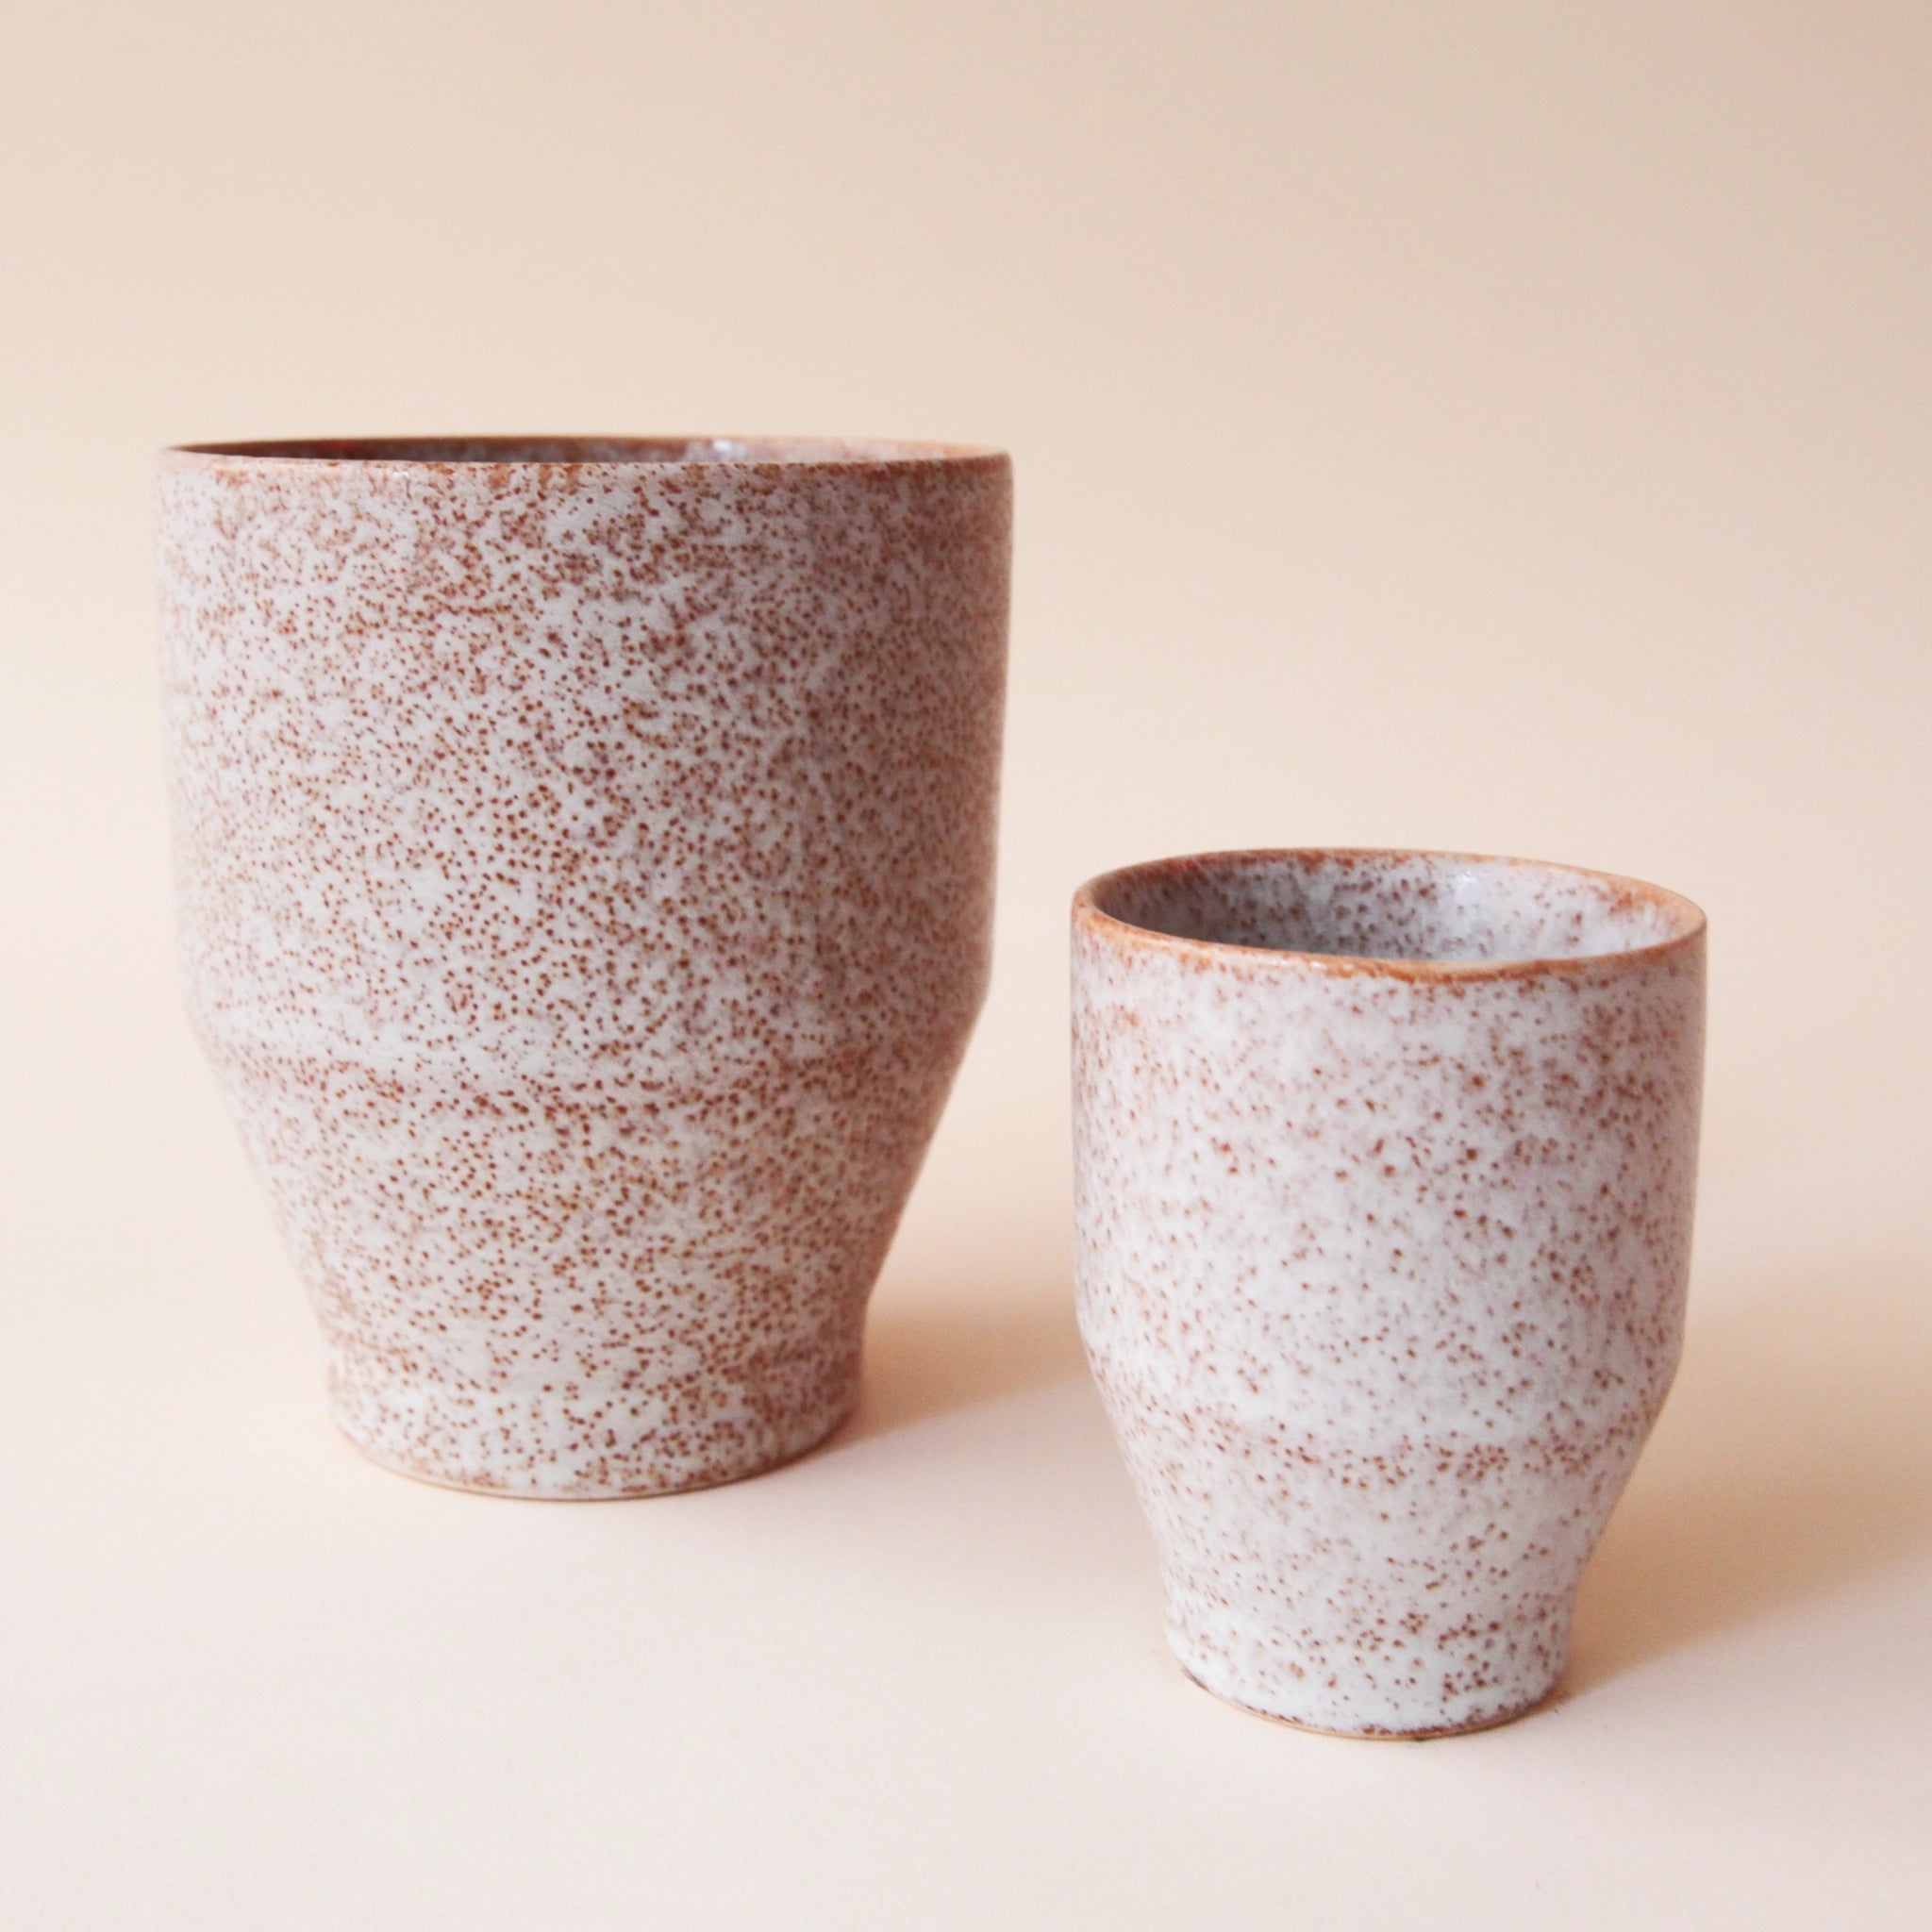 A small and large classic ceramic planter with a speckled white and tan texture.